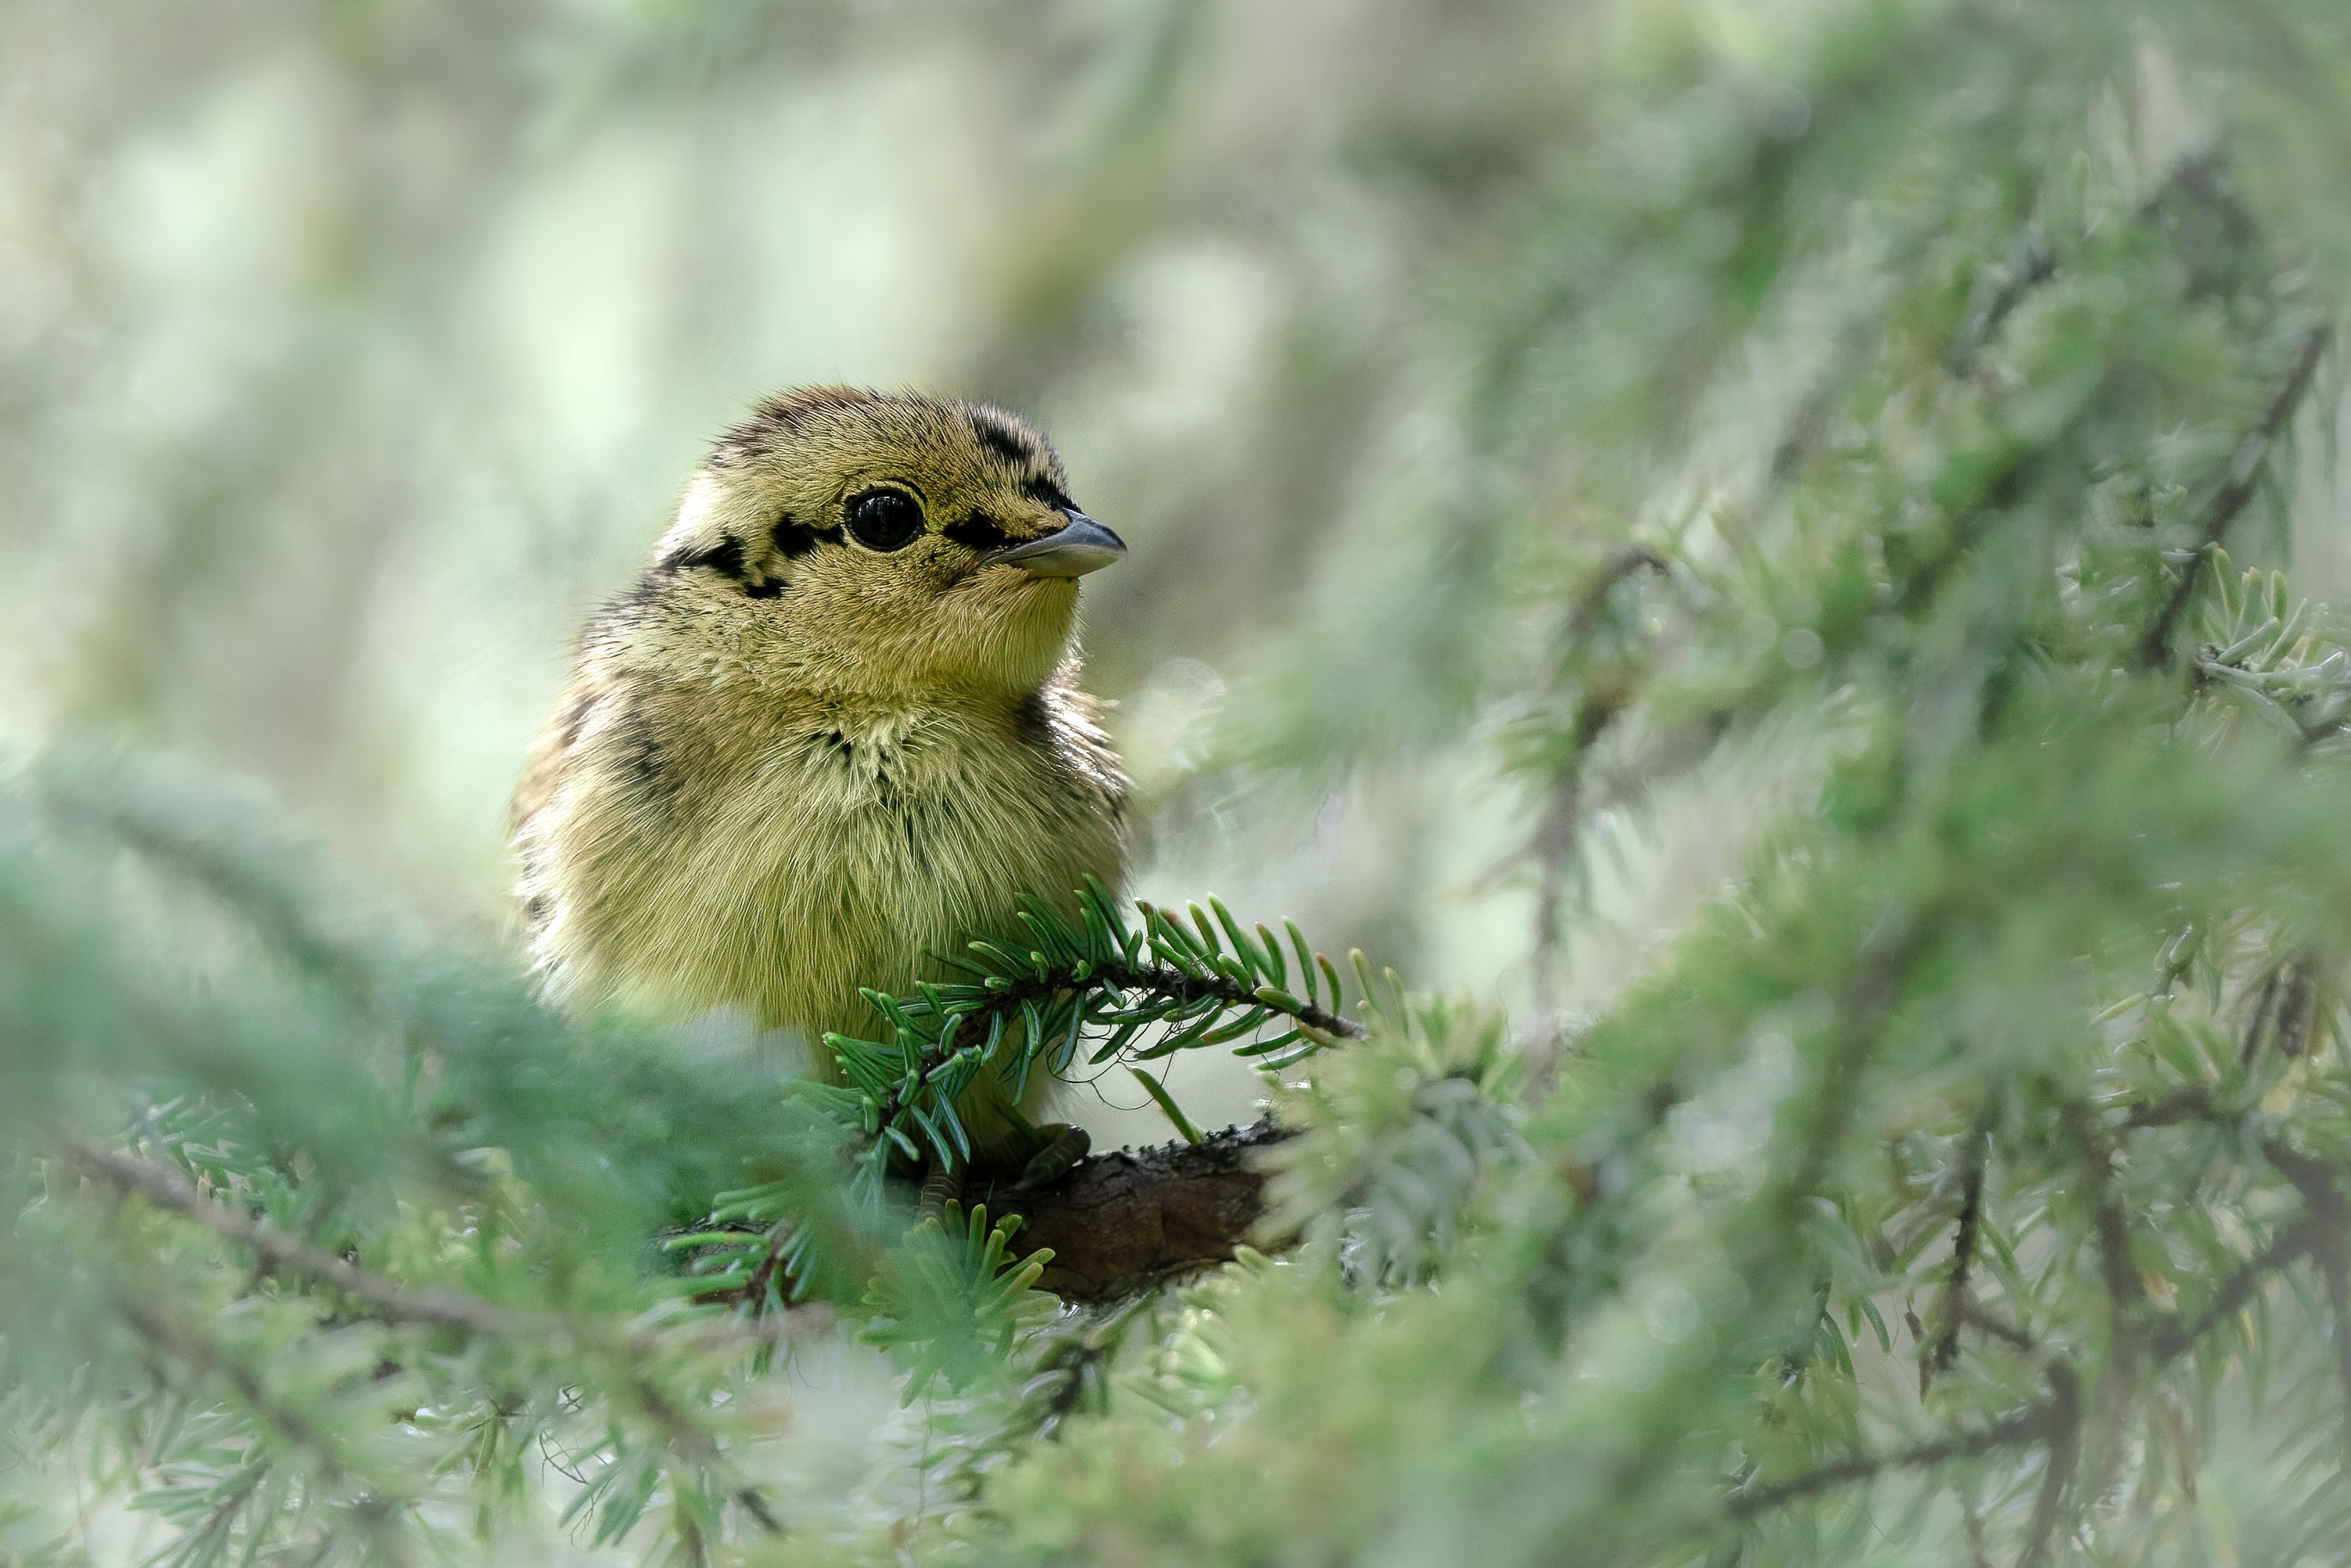 A spruce grouse chick hiding away in a spruce tree